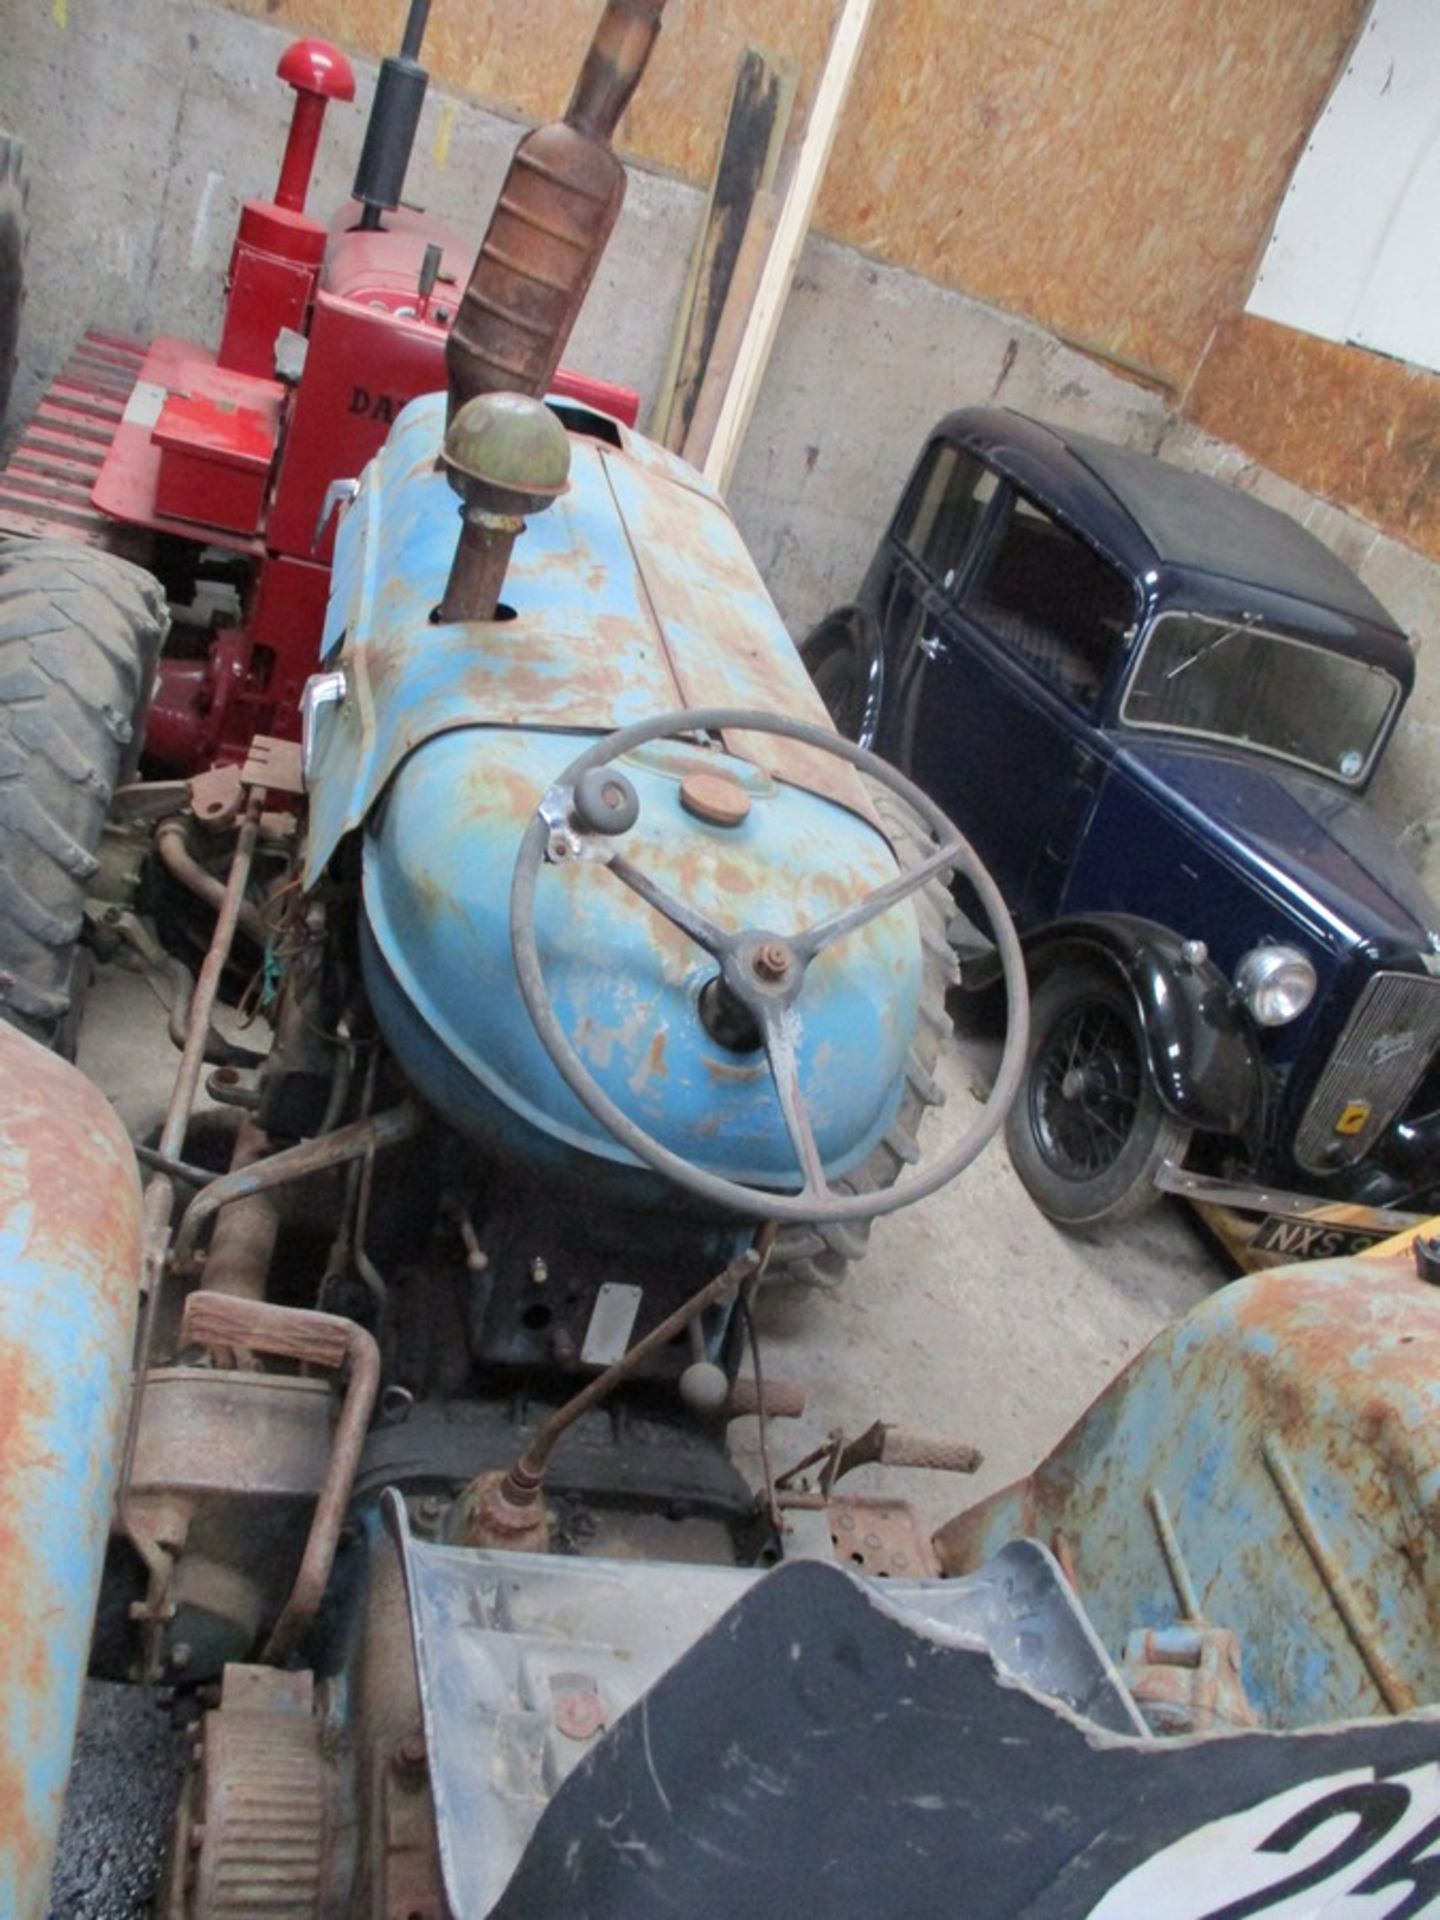 FORDSON SUPER MAJOR 4WD TRACTOR BARN FIND CONDITION NOT BEEN STARTED FOR APPROX 2 YEARS - Image 4 of 4